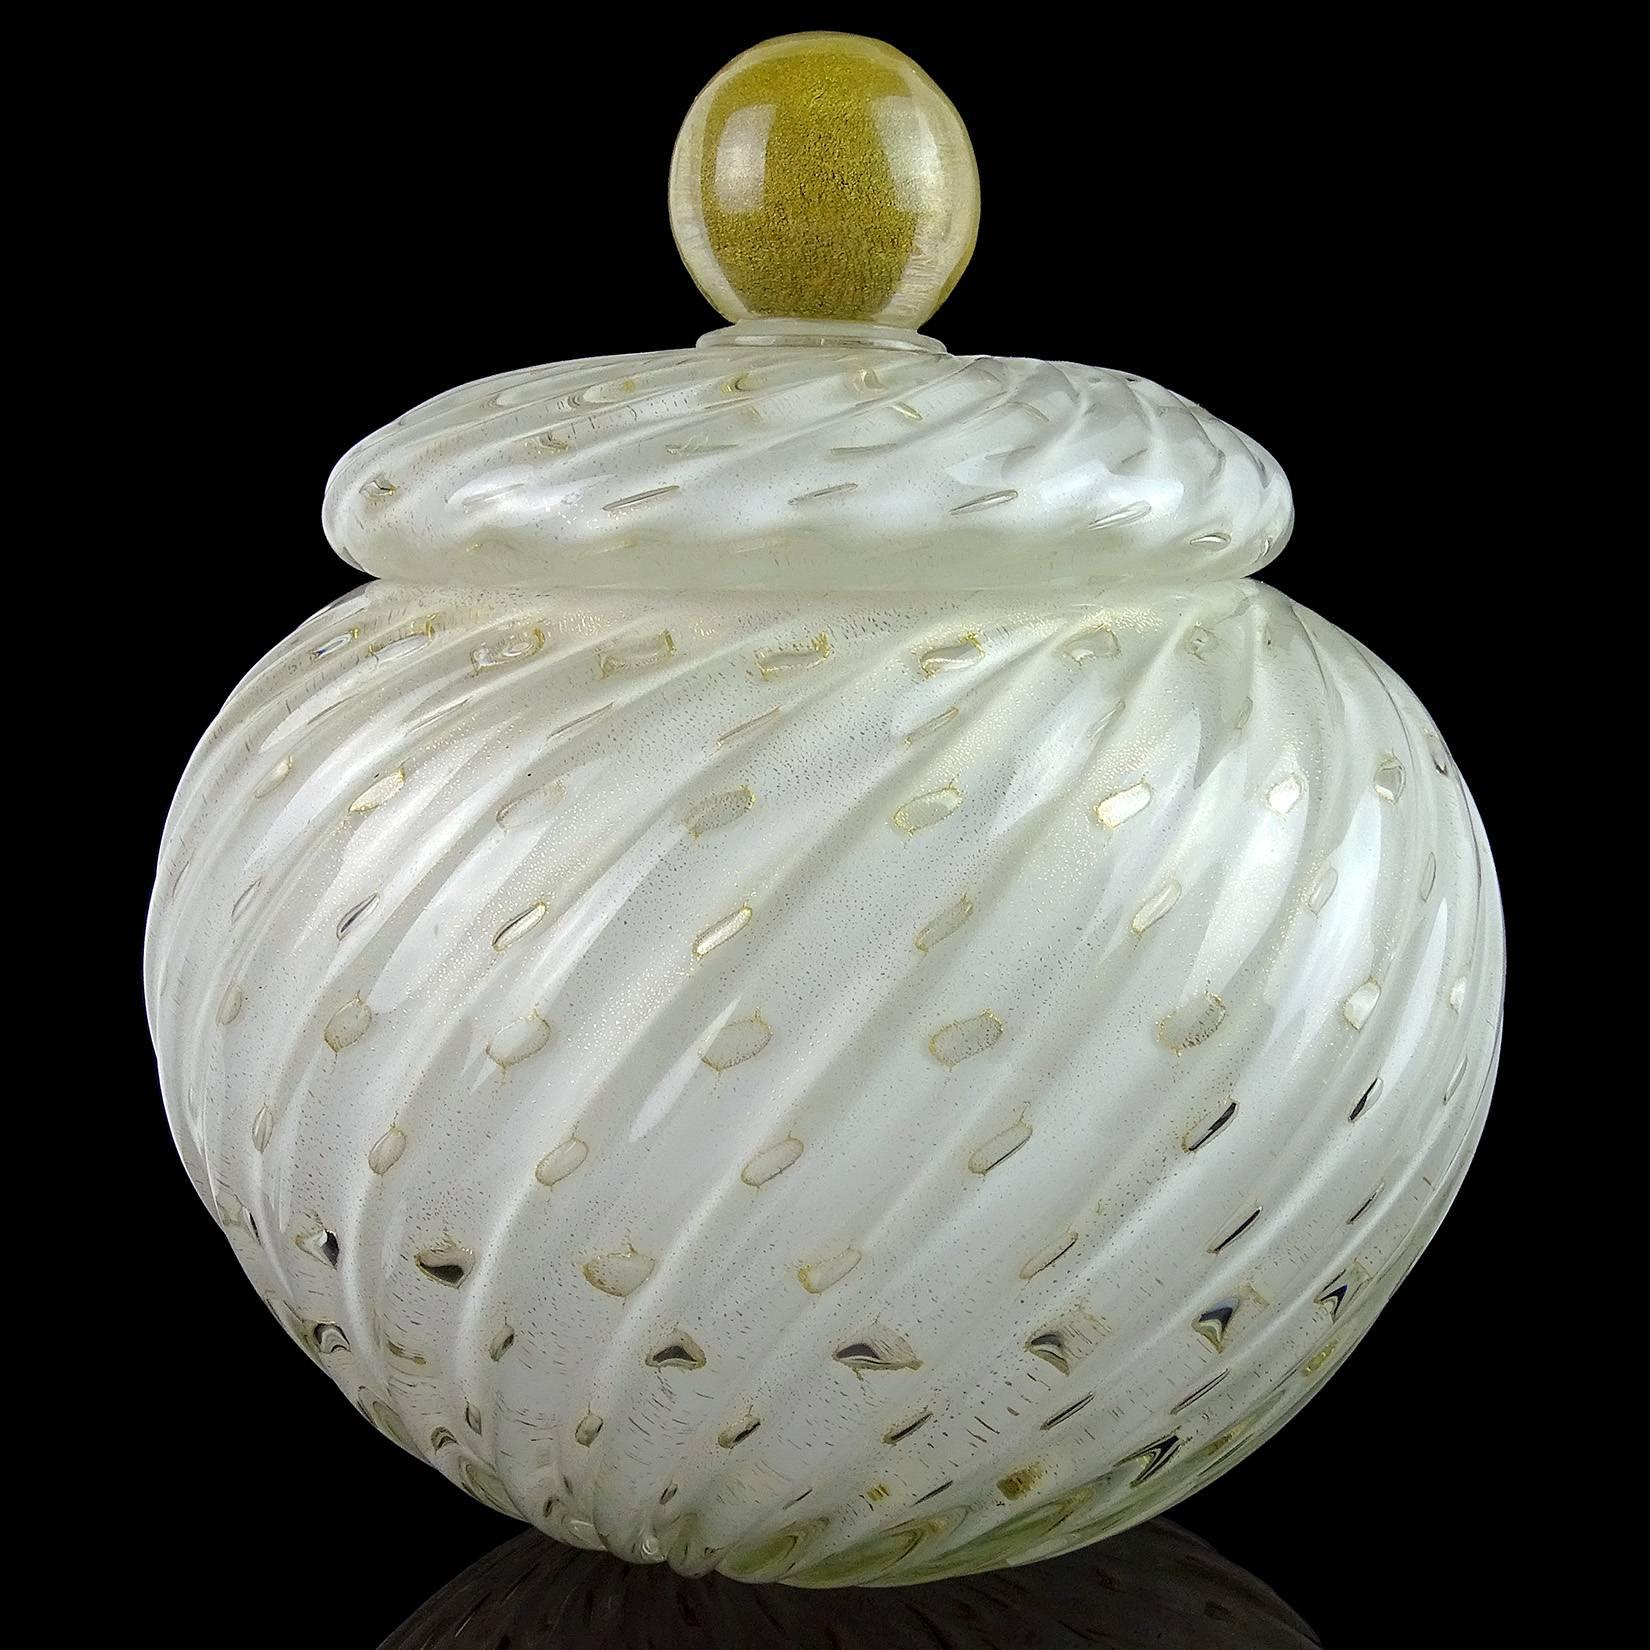 Beautiful Murano hand blown white, controlled bubbles and gold flecks Italian art glass cookie jar / container. Documented to designer Alfredo Barbini, circa 1950s. The piece is large and heavy, with a ribbed pattern and gold ball top decoration.